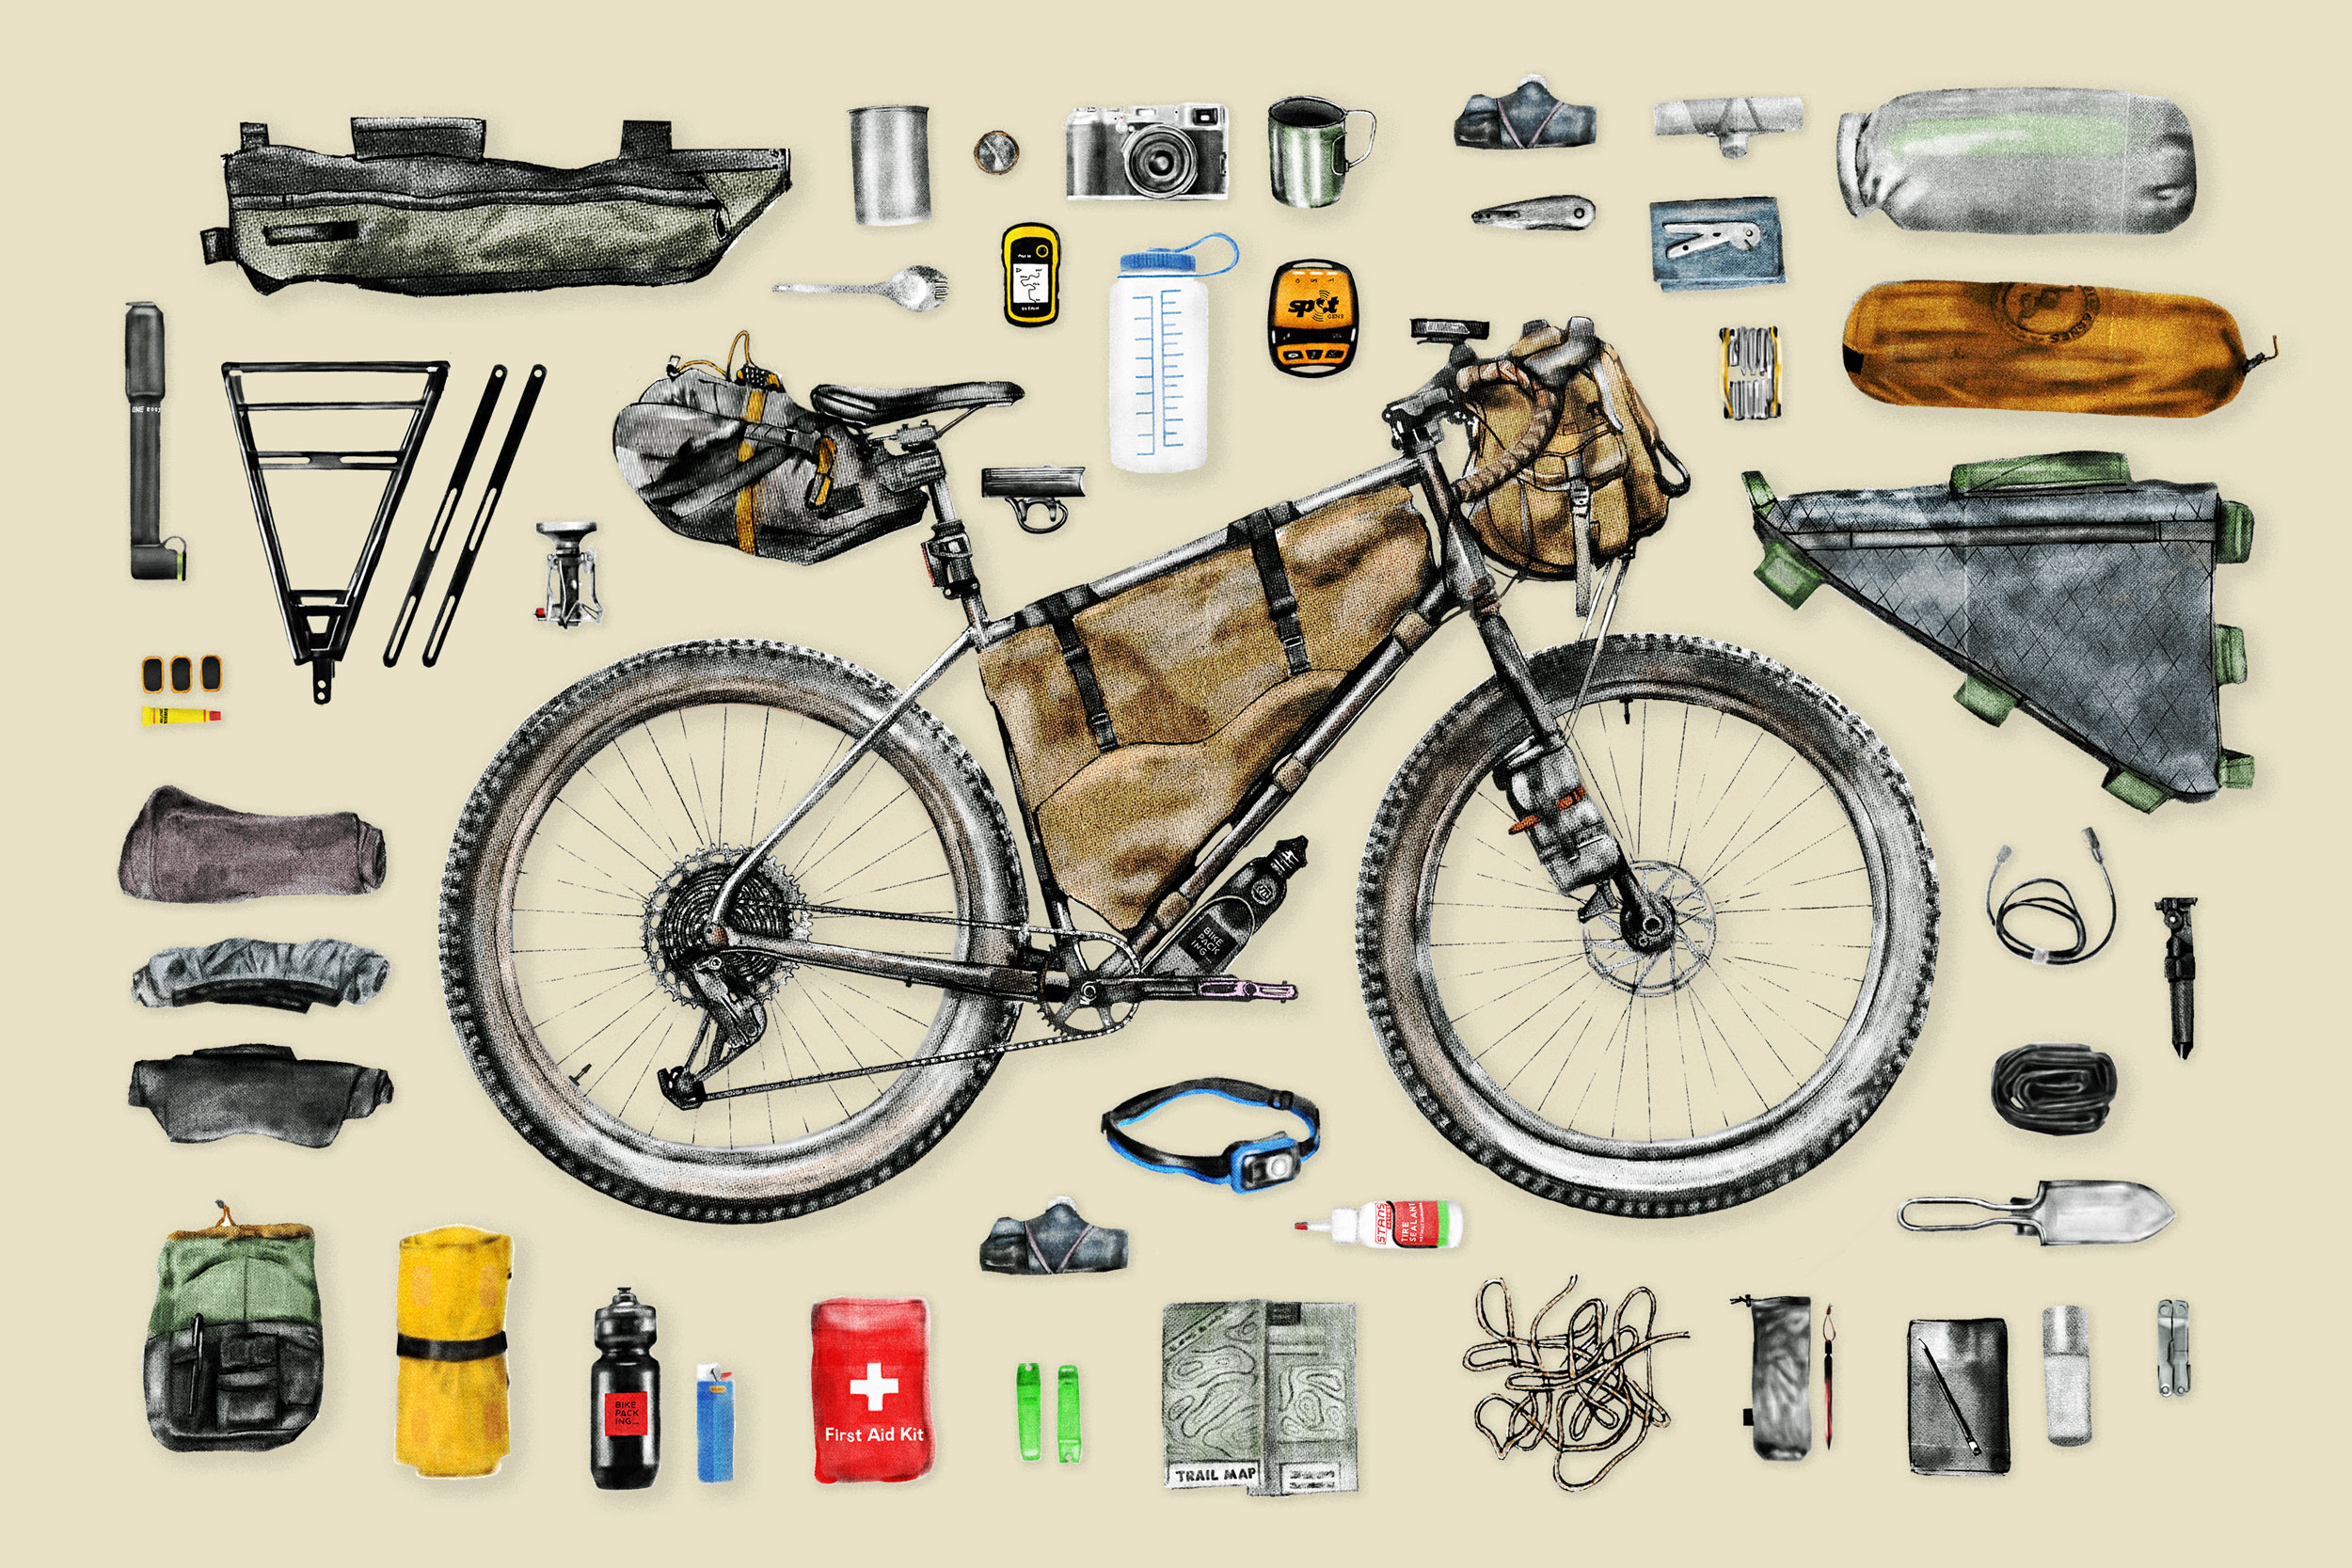 Saddle Bags Mountain Bike Essentials: Ride in Style